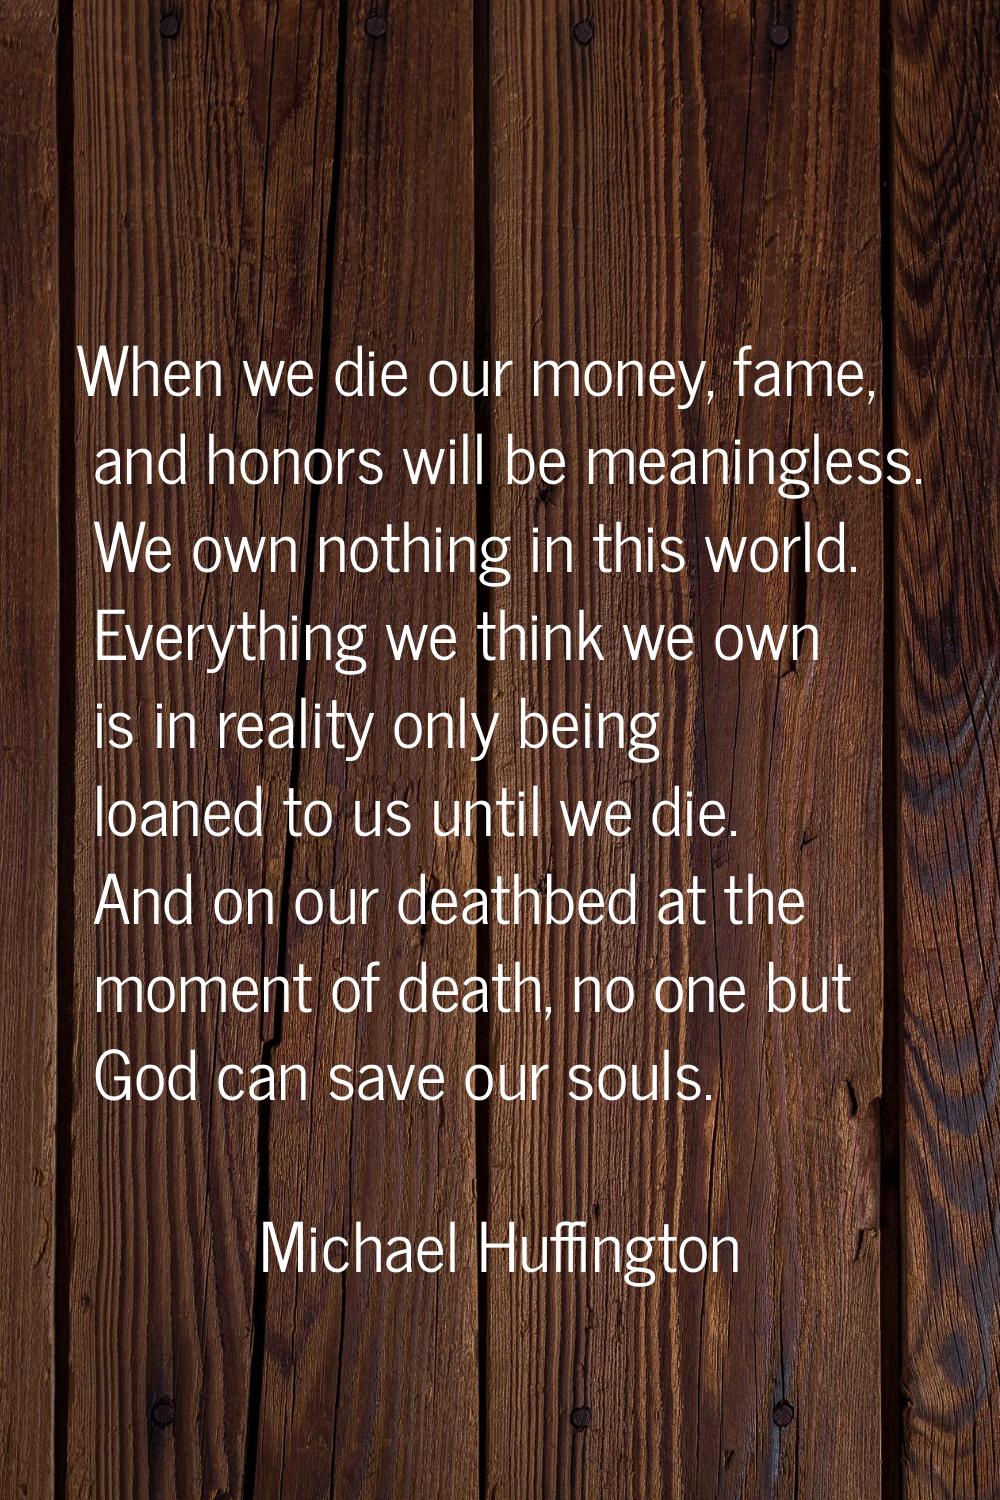 When we die our money, fame, and honors will be meaningless. We own nothing in this world. Everythi